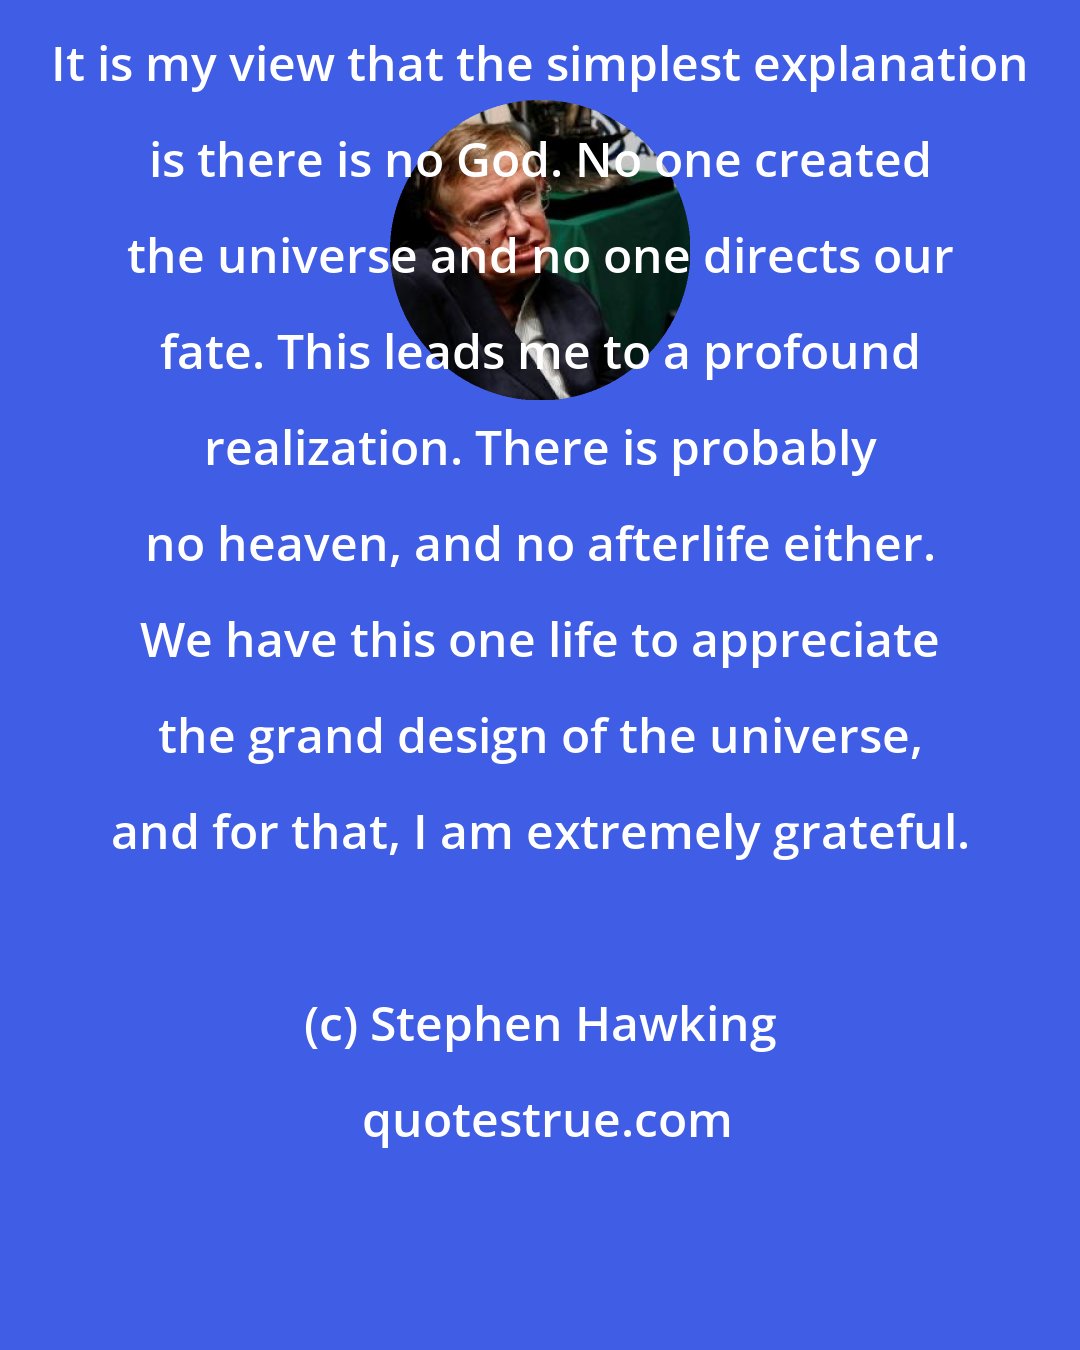 Stephen Hawking: It is my view that the simplest explanation is there is no God. No one created the universe and no one directs our fate. This leads me to a profound realization. There is probably no heaven, and no afterlife either. We have this one life to appreciate the grand design of the universe, and for that, I am extremely grateful.